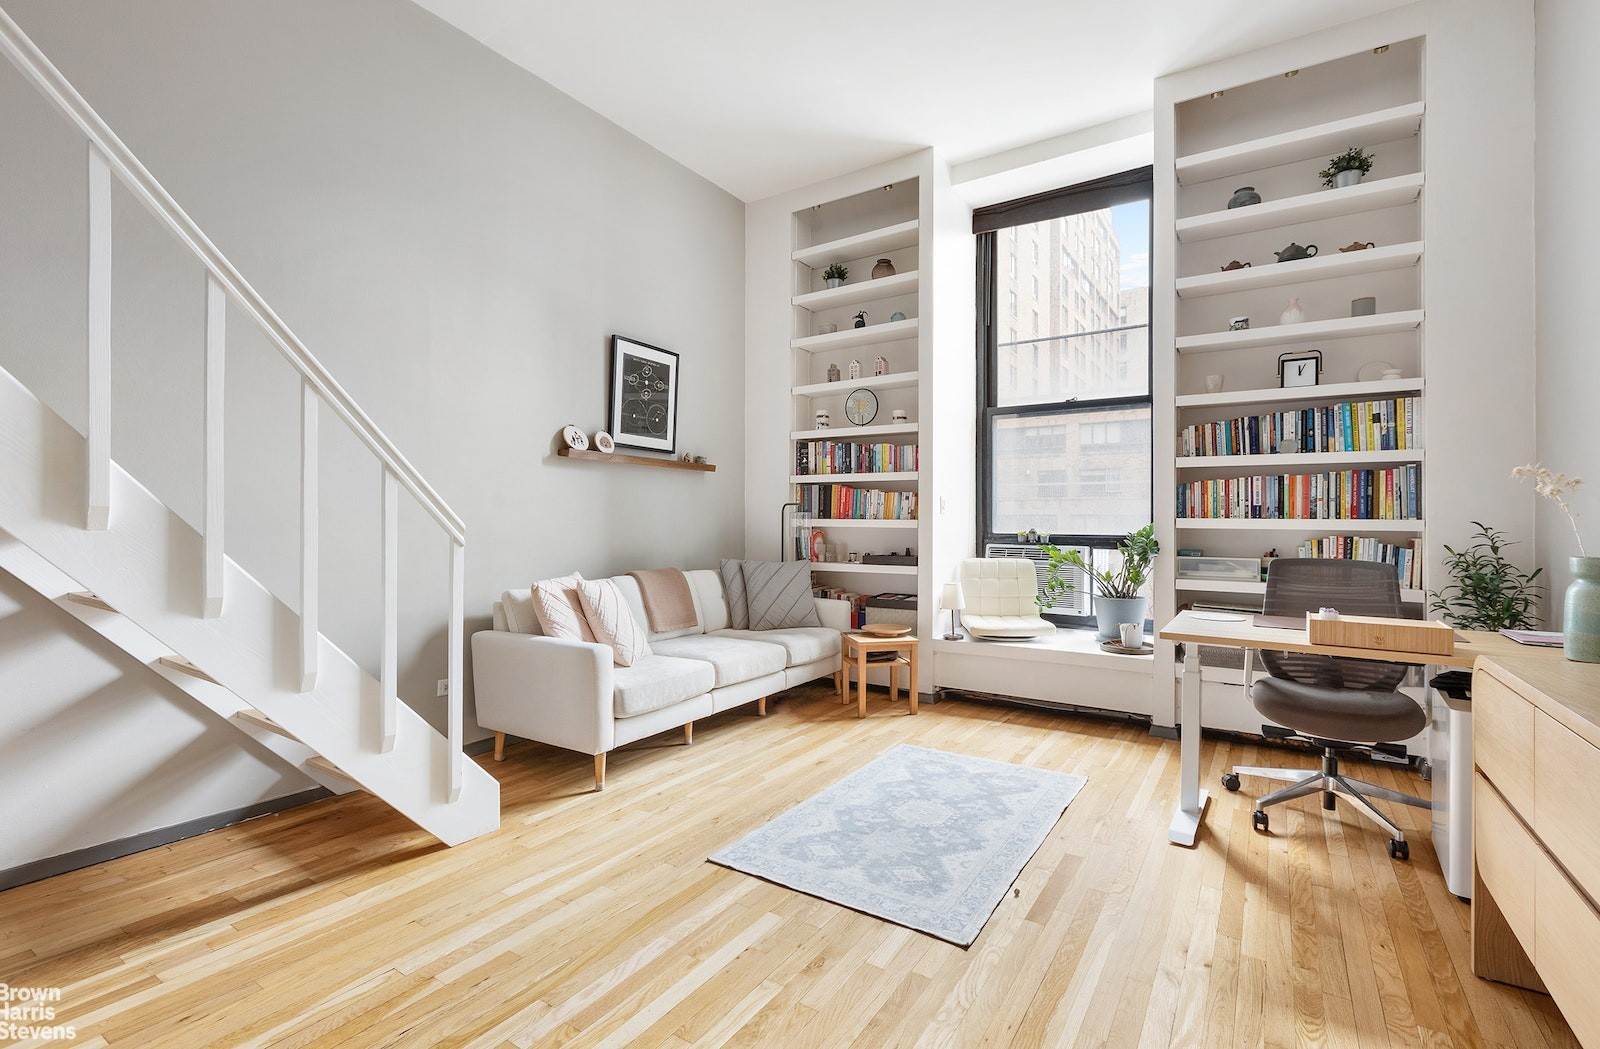 Cooperative for Sale at Greenwich Village, Manhattan, NY 10012